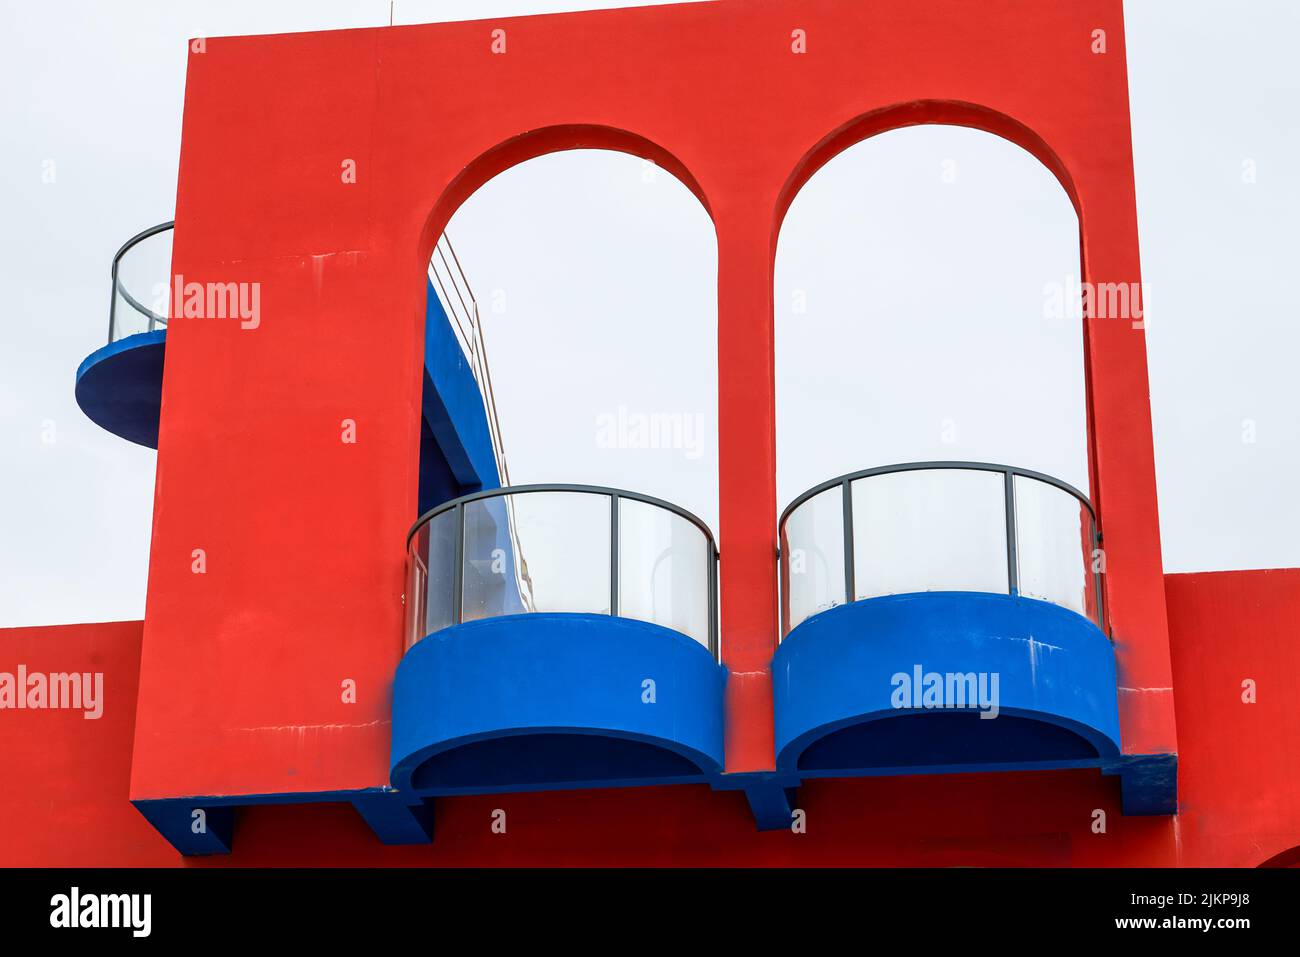 Close-up of modernist buildings in contrasting red and blue colors Stock Photo